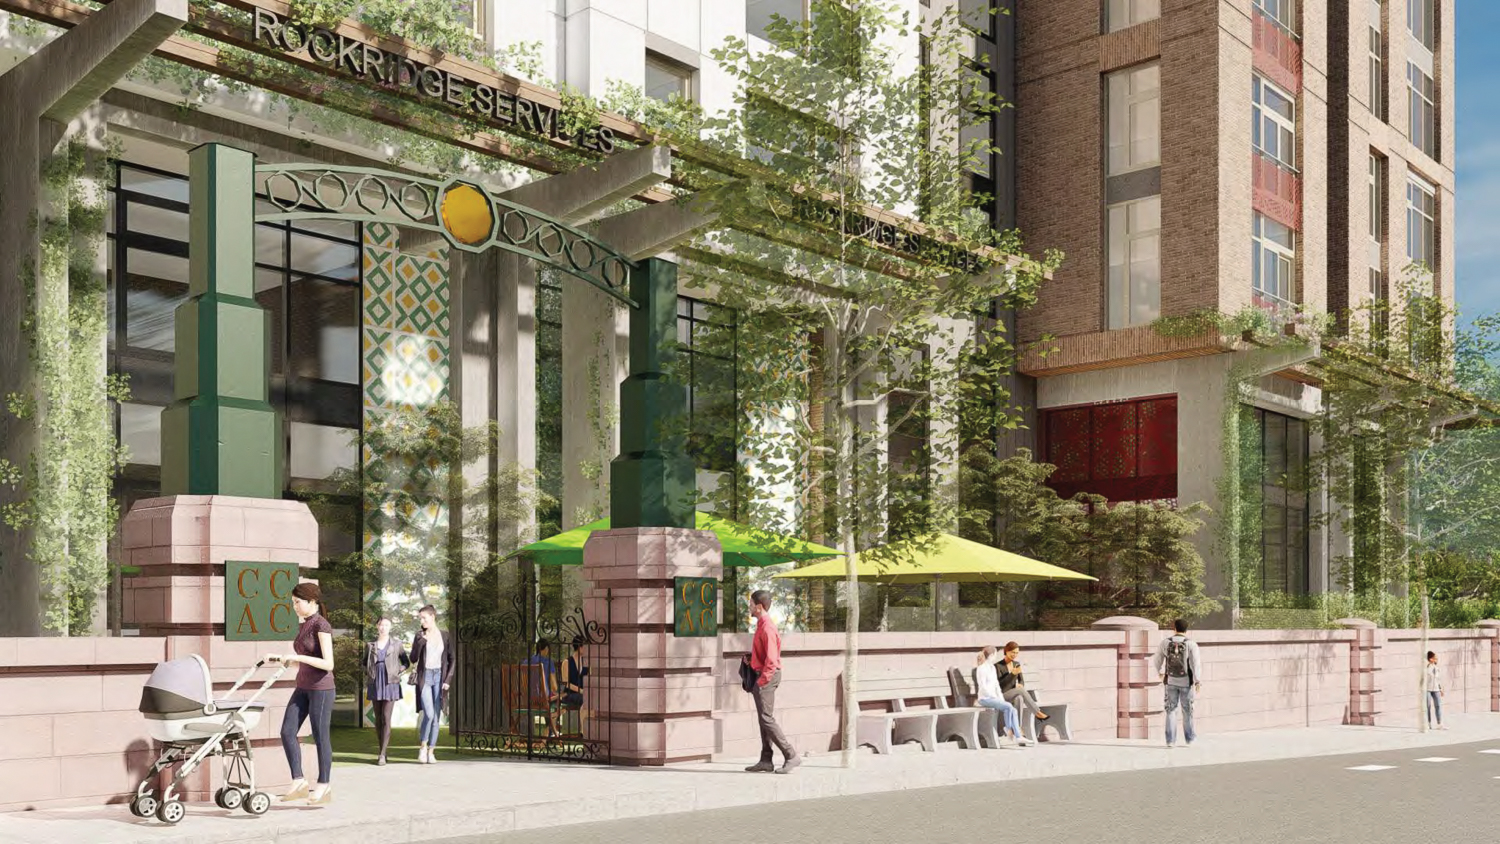 5200 Broadway wall and gate over the residential entry, rendering by Mithun